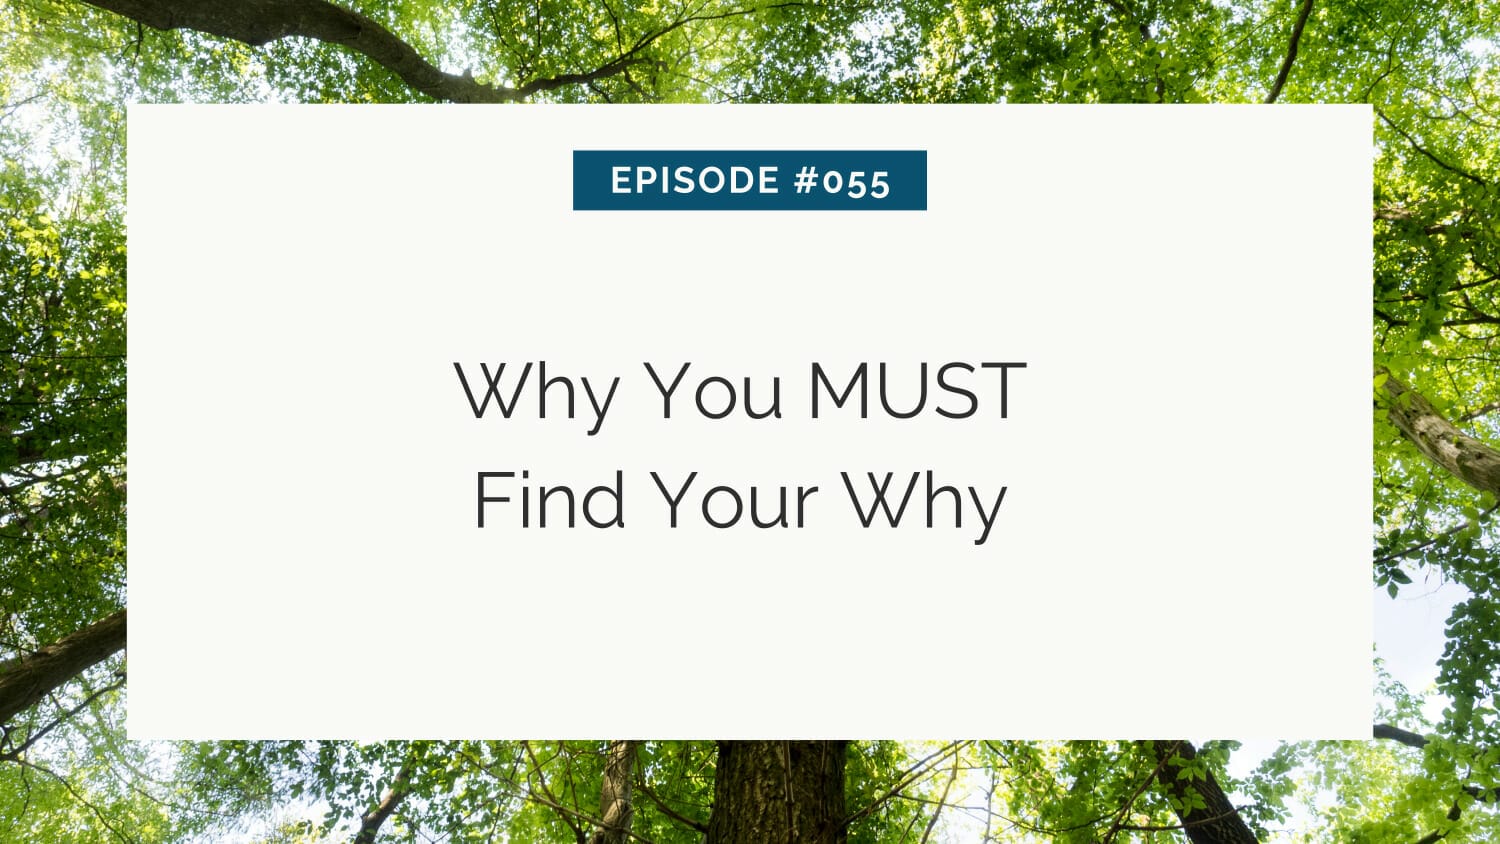 A promotional graphic for a content episode titled "why you must find your why," set against a backdrop of tree foliage.